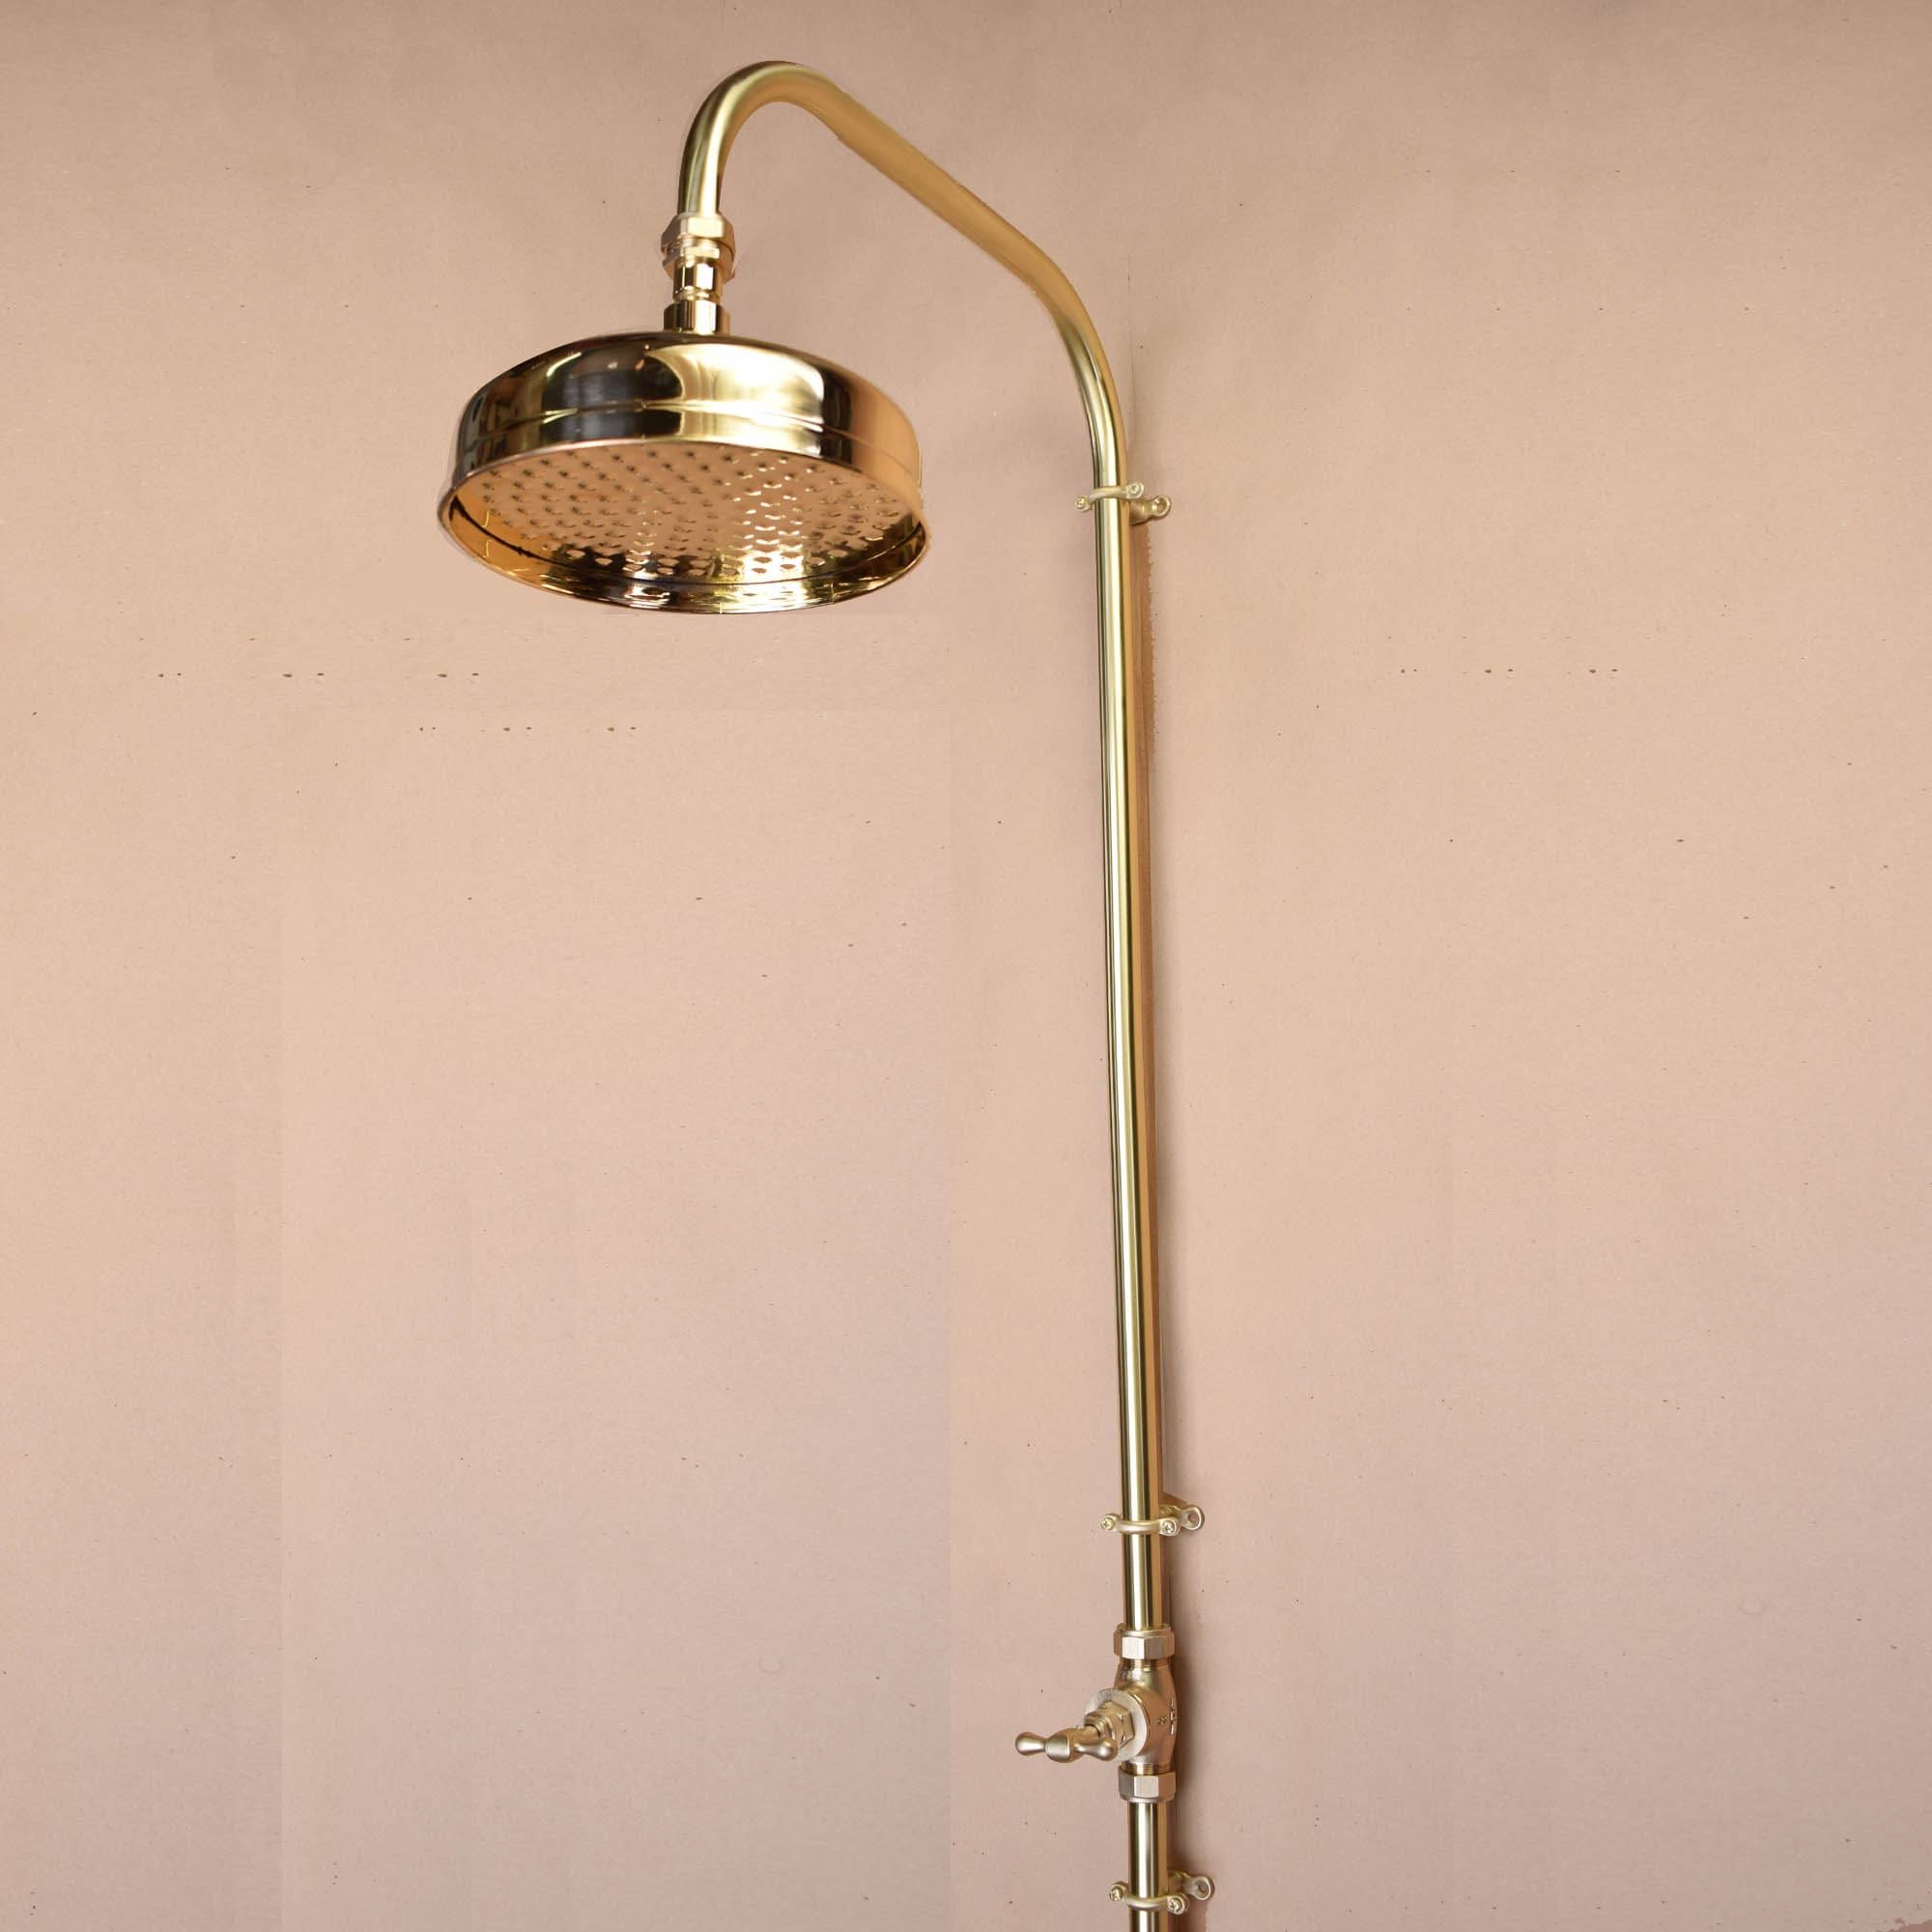 indoor or outdoor brass fixtures, solid brass shower head photographed on a plastered wall